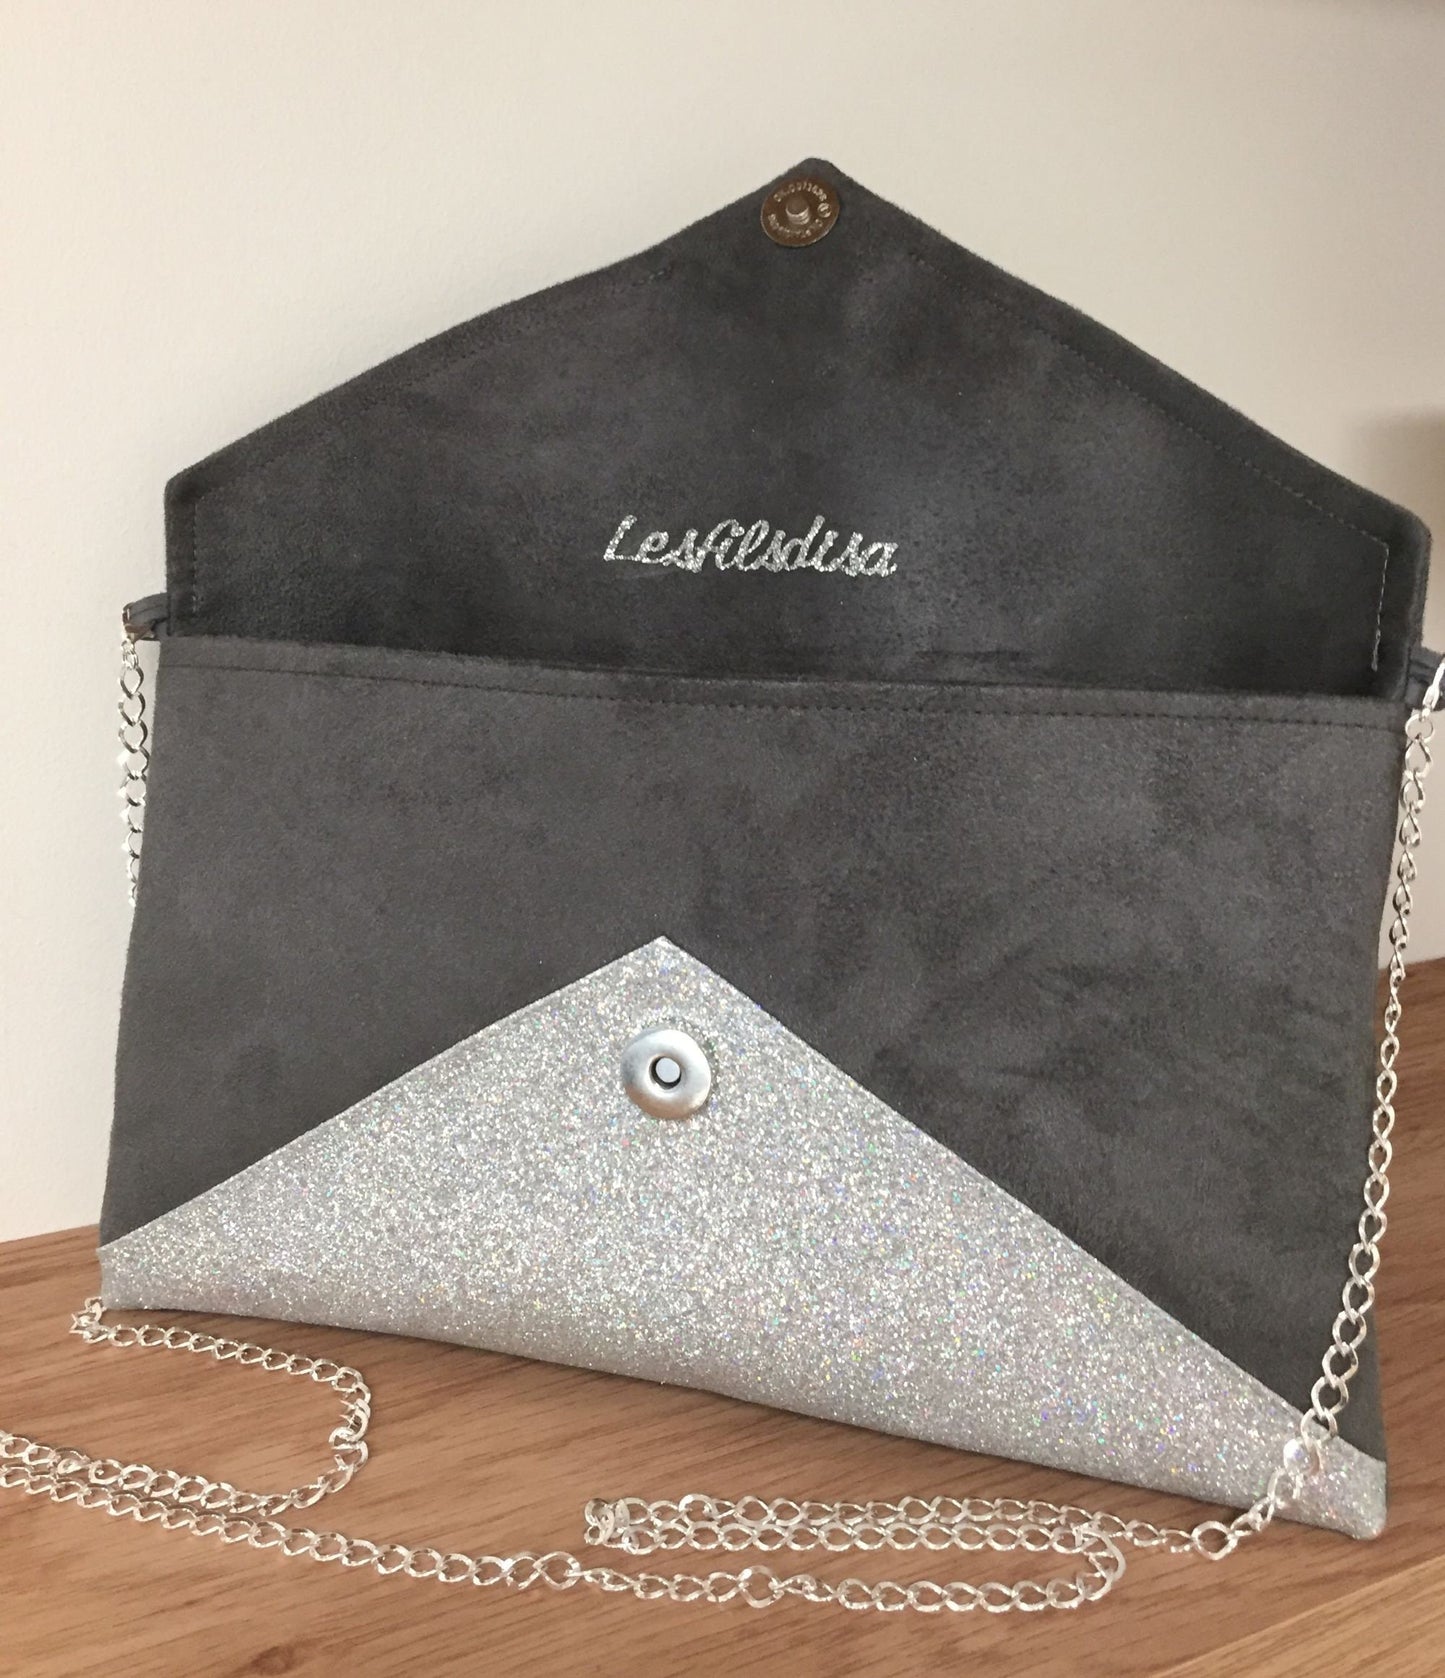 Mouse gray Isa clutch bag with silver sequins